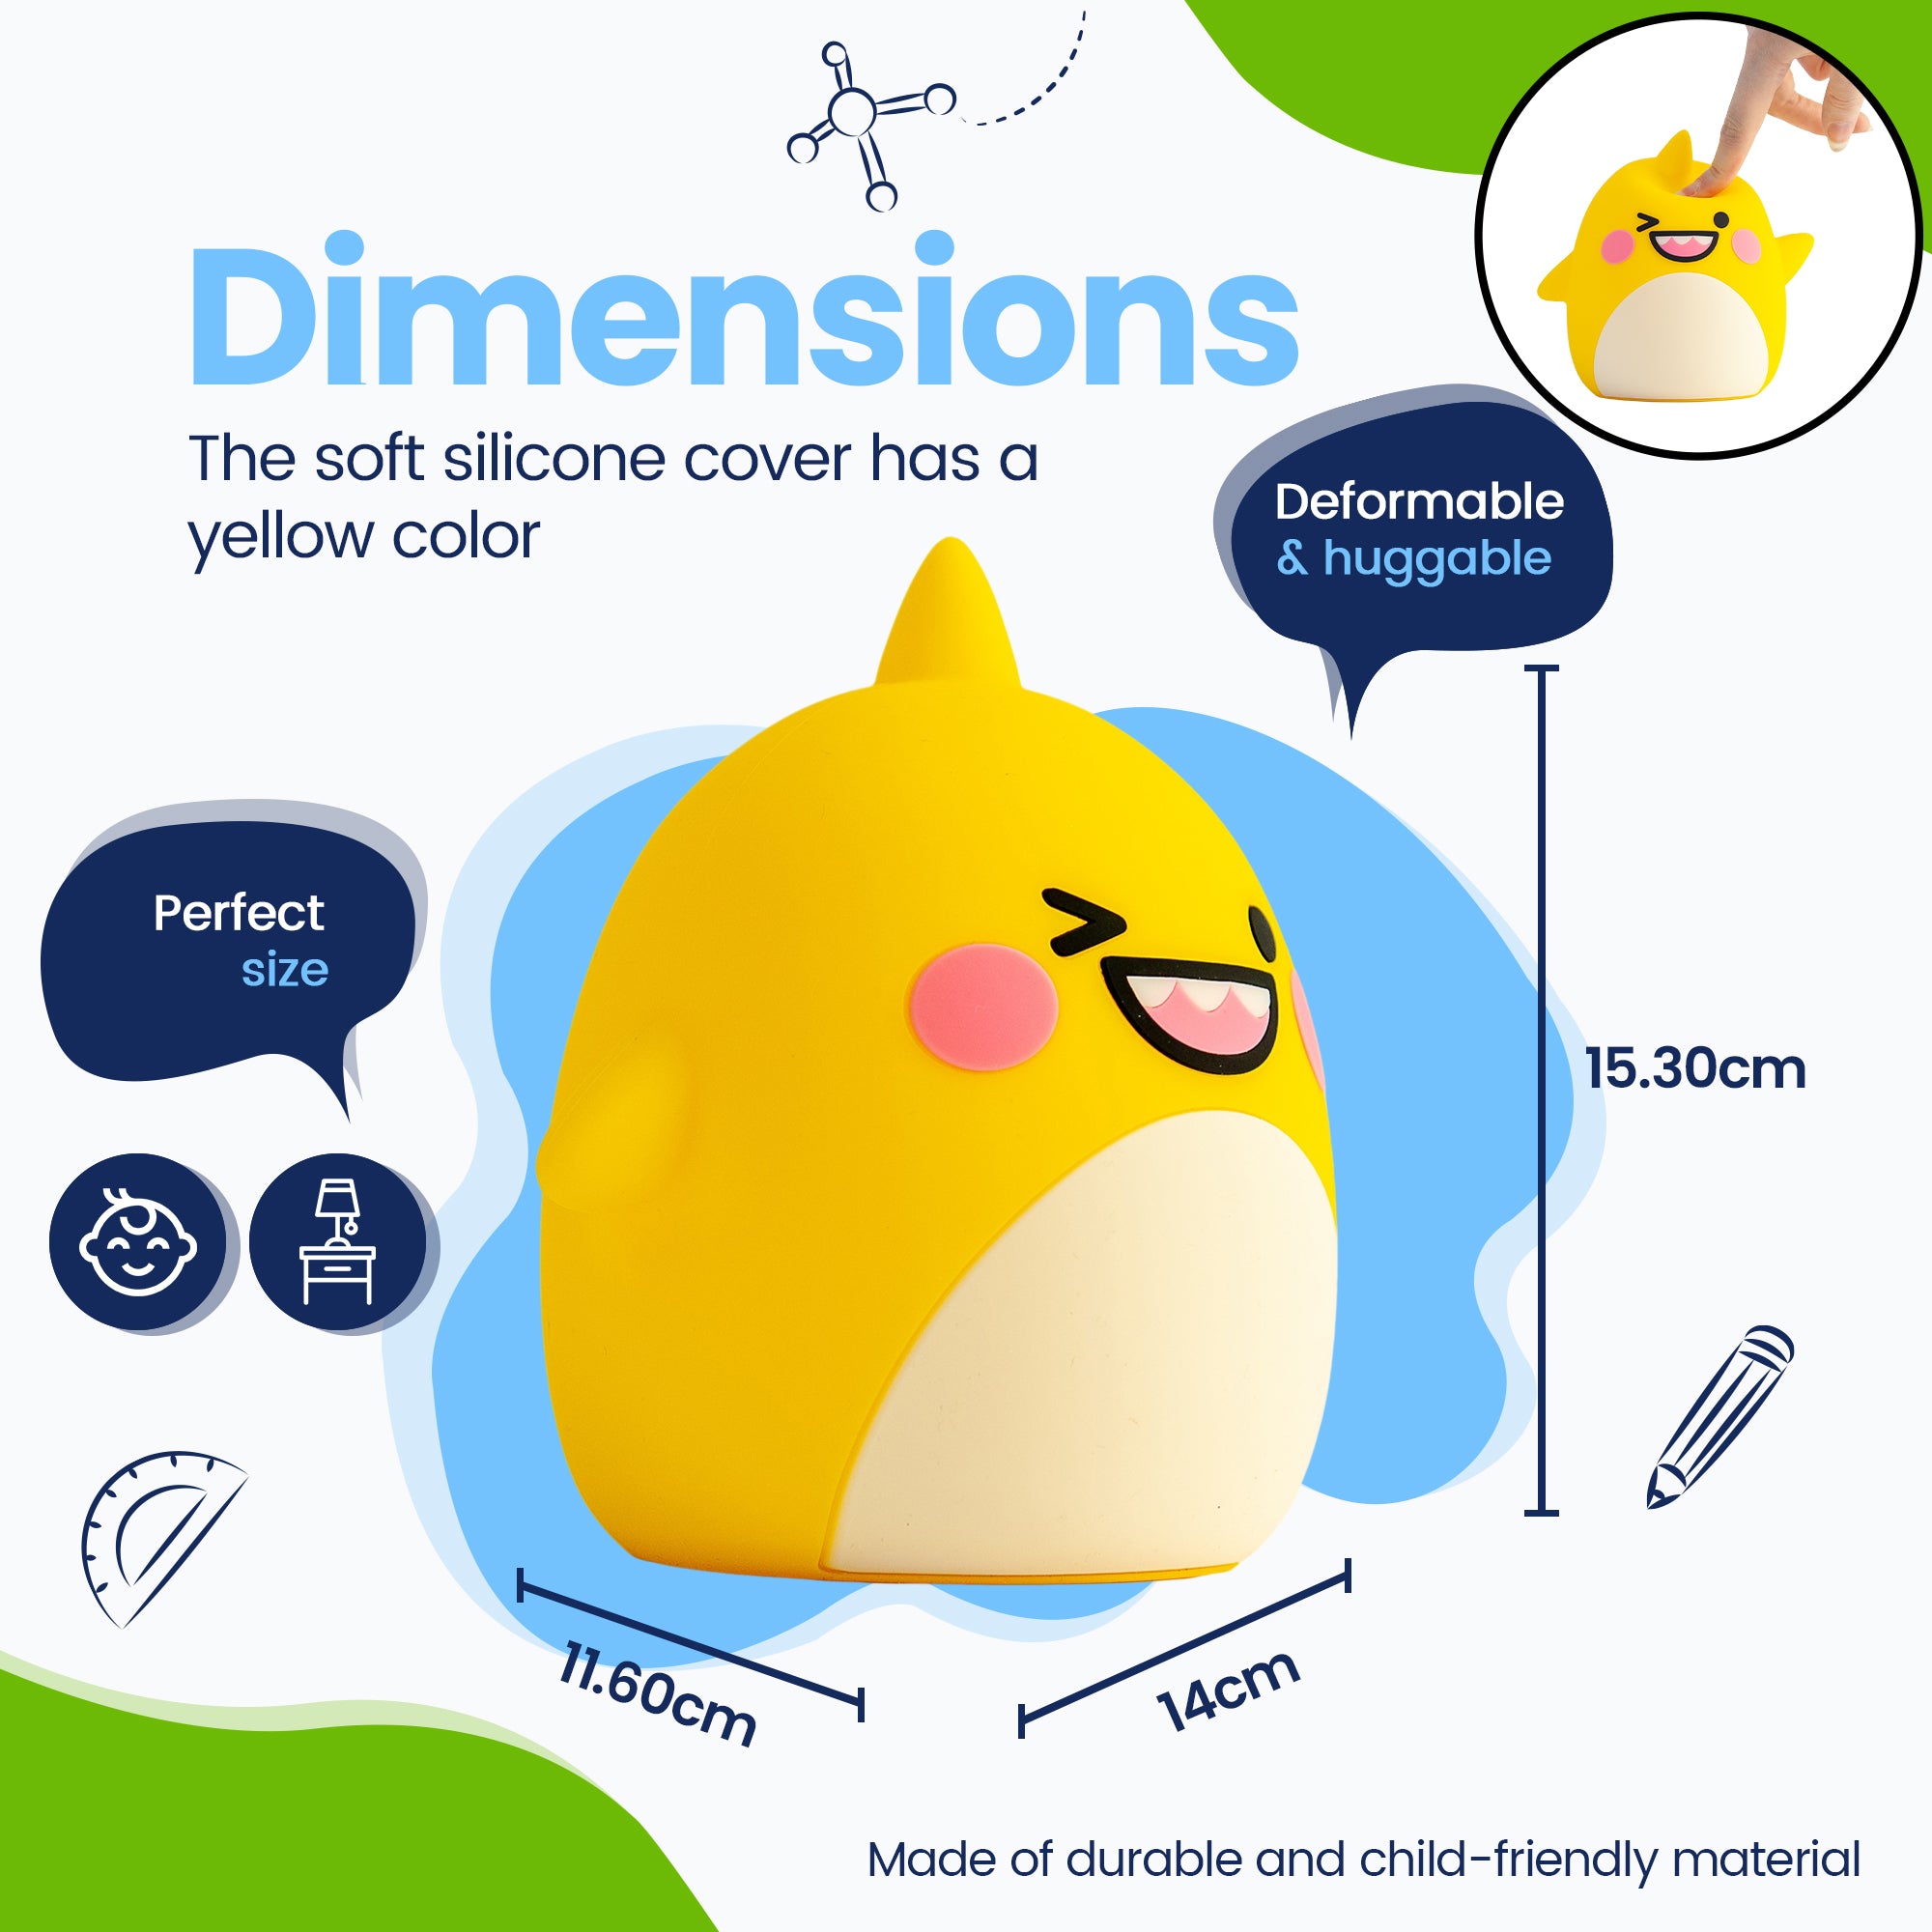 Dimensions Baby Shark Night Light - Perfect size - Premium Design - The silicone cover is yellow in color